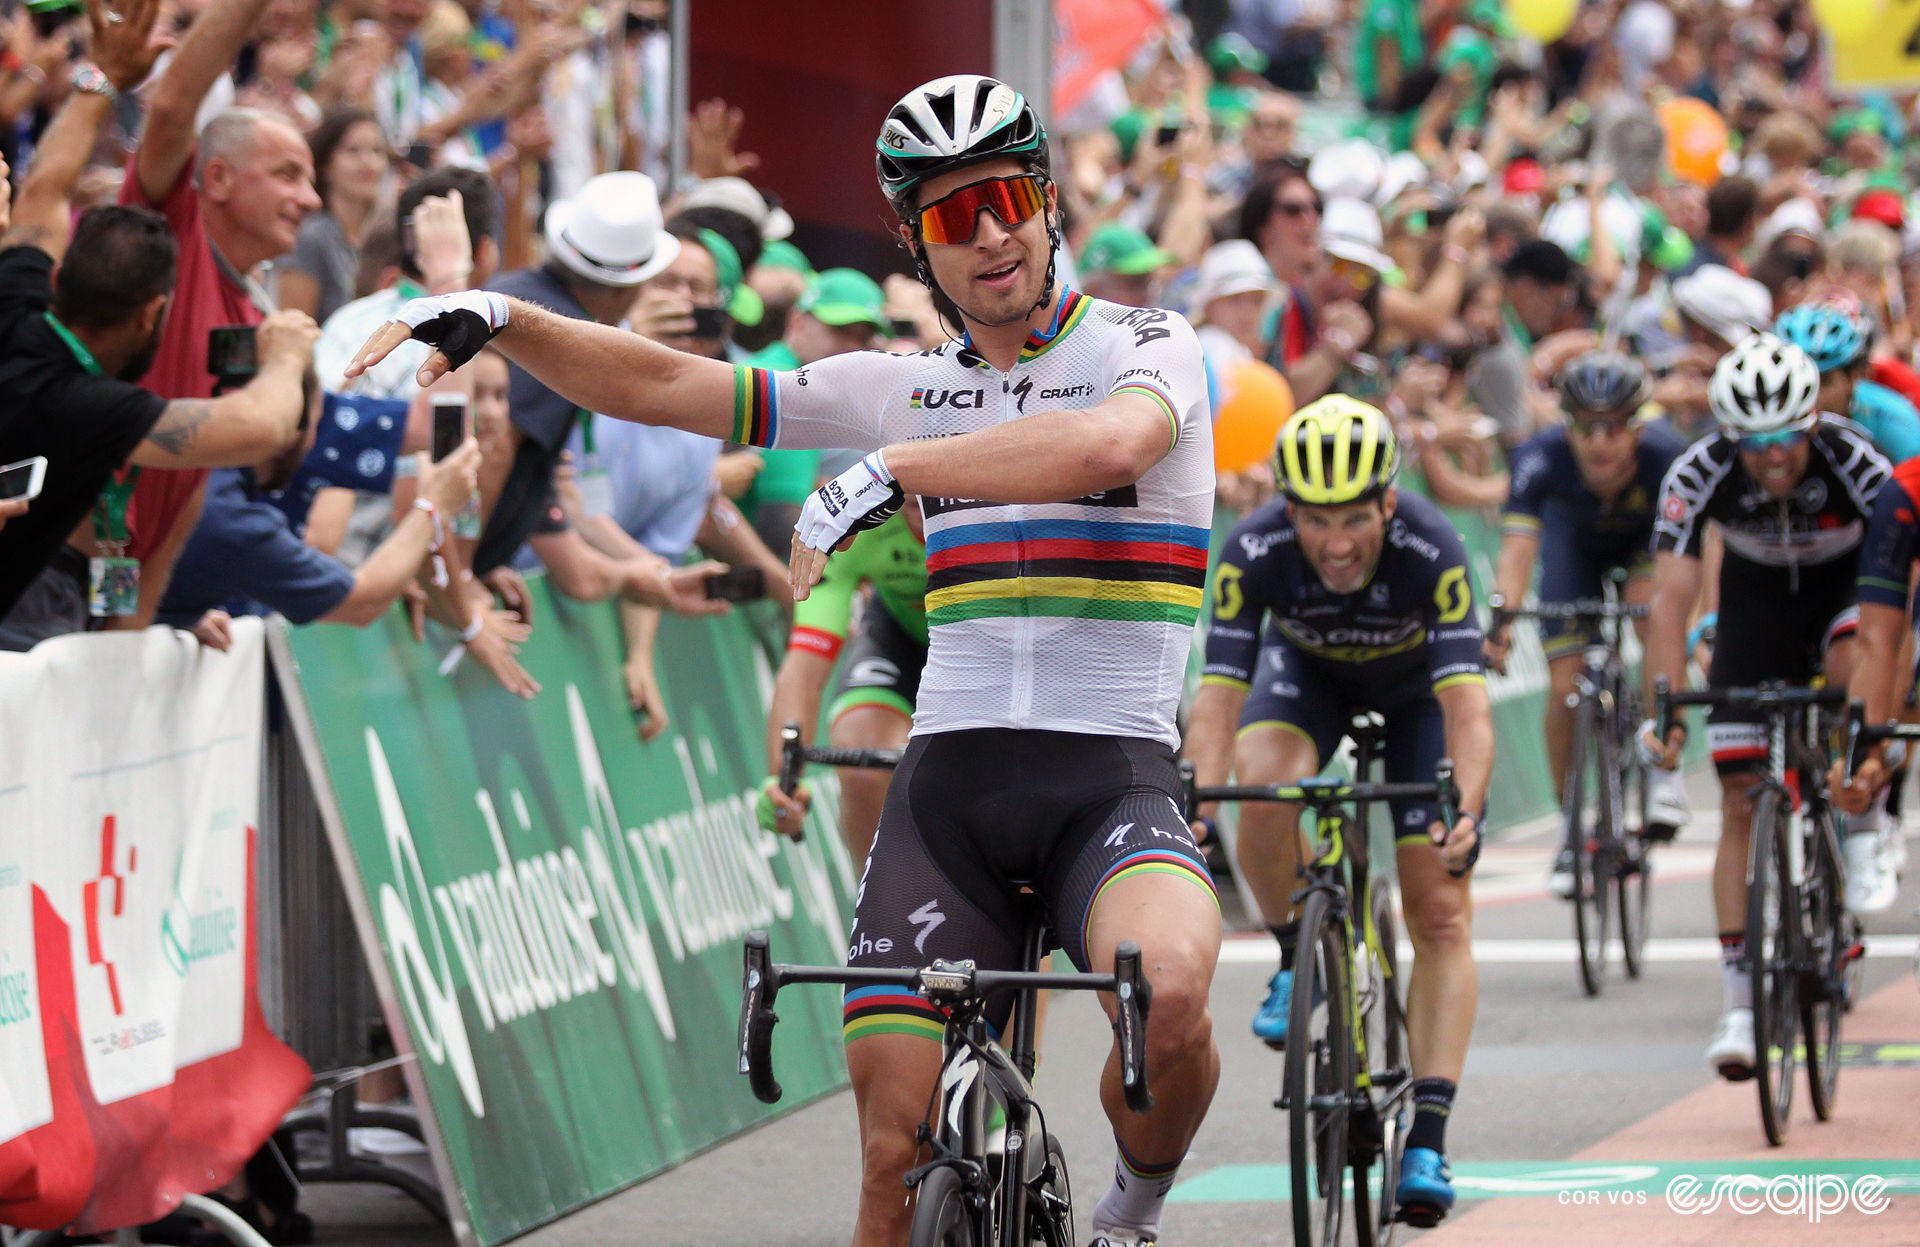 Peter Sagan celebrates winning a stage at the 2017 Tour de Suisse, with two arms out to his right-hand side.